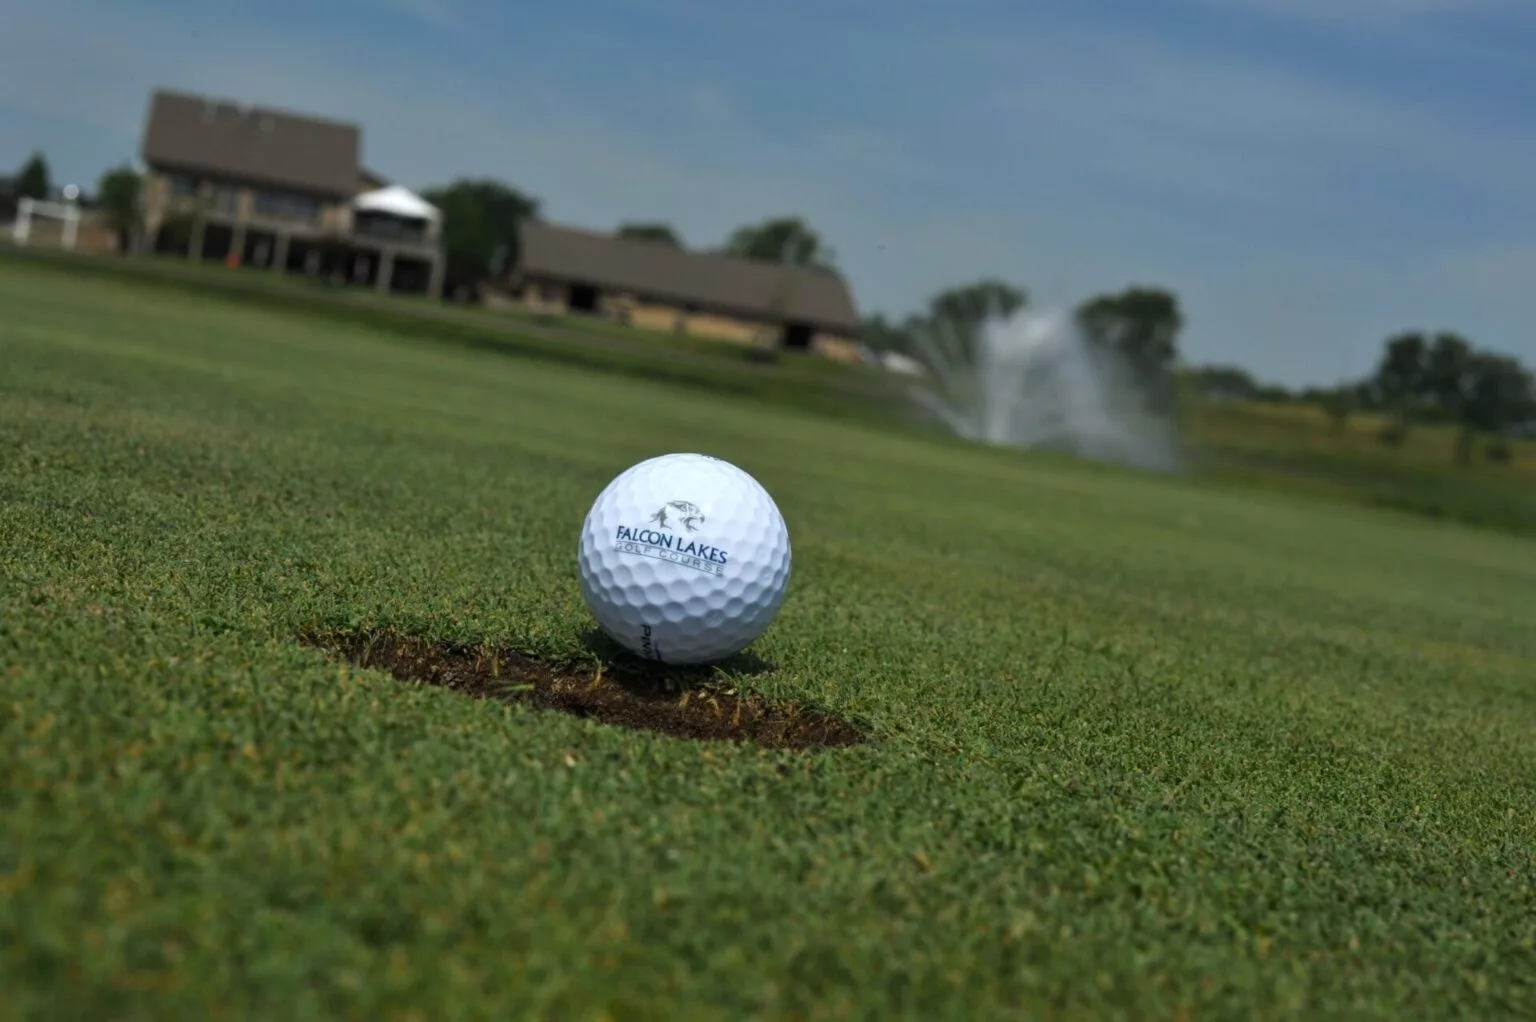 A golf ball bearing the Falcon Lakes logo is resting on the green.